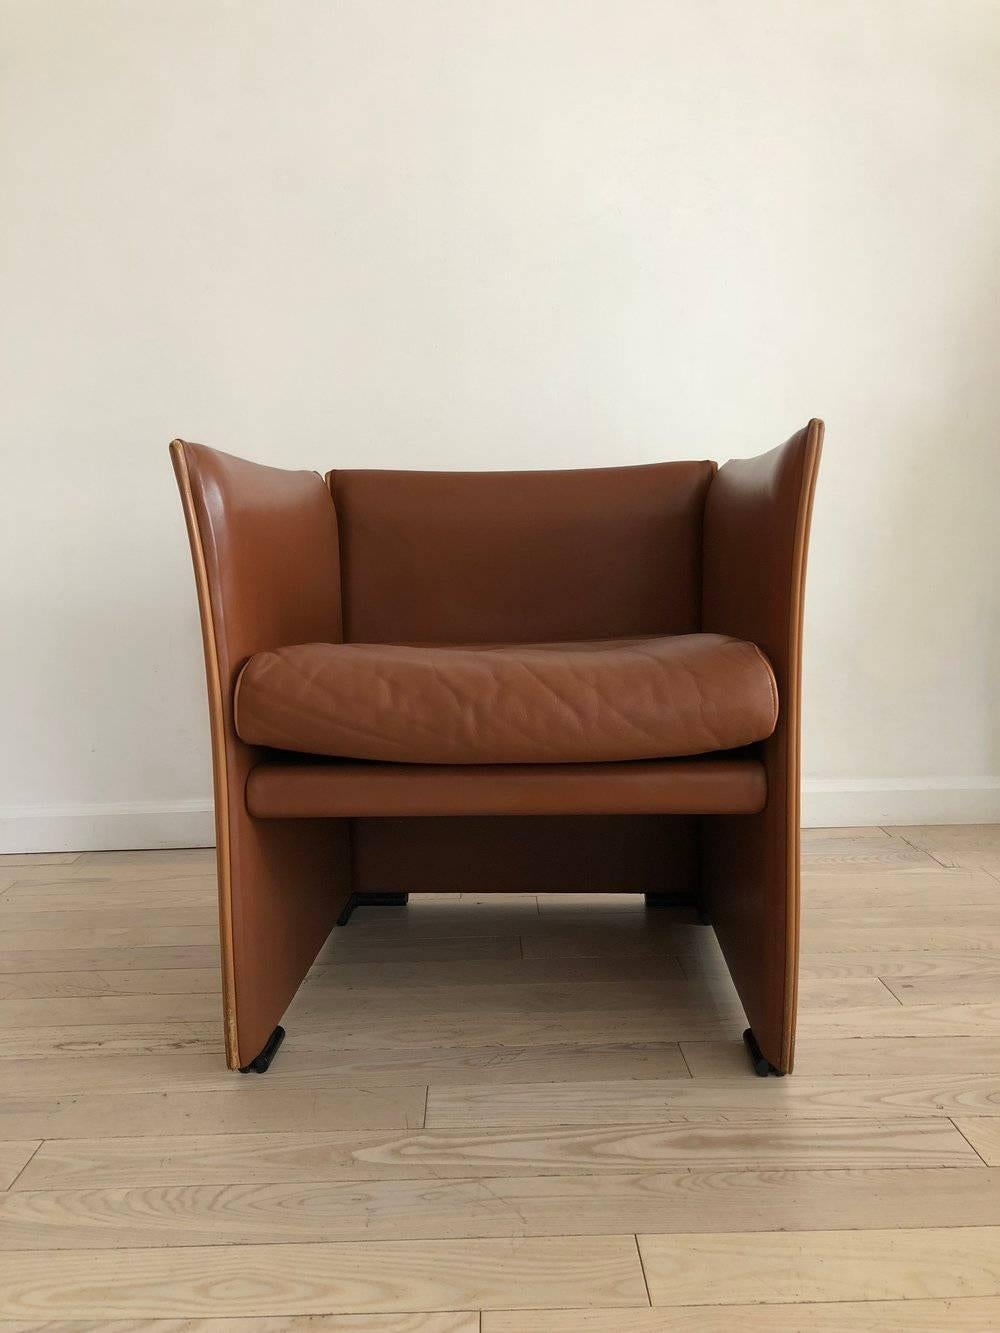 1976 Mario Bellini for Cassina 401 break leather chair! Amazing condition and creamy caramel leather. Zipper detail sides. Black plastic feet. Made in Italy. excellent vintage condition. Minor wear on leather on the corners. Very comfortable.